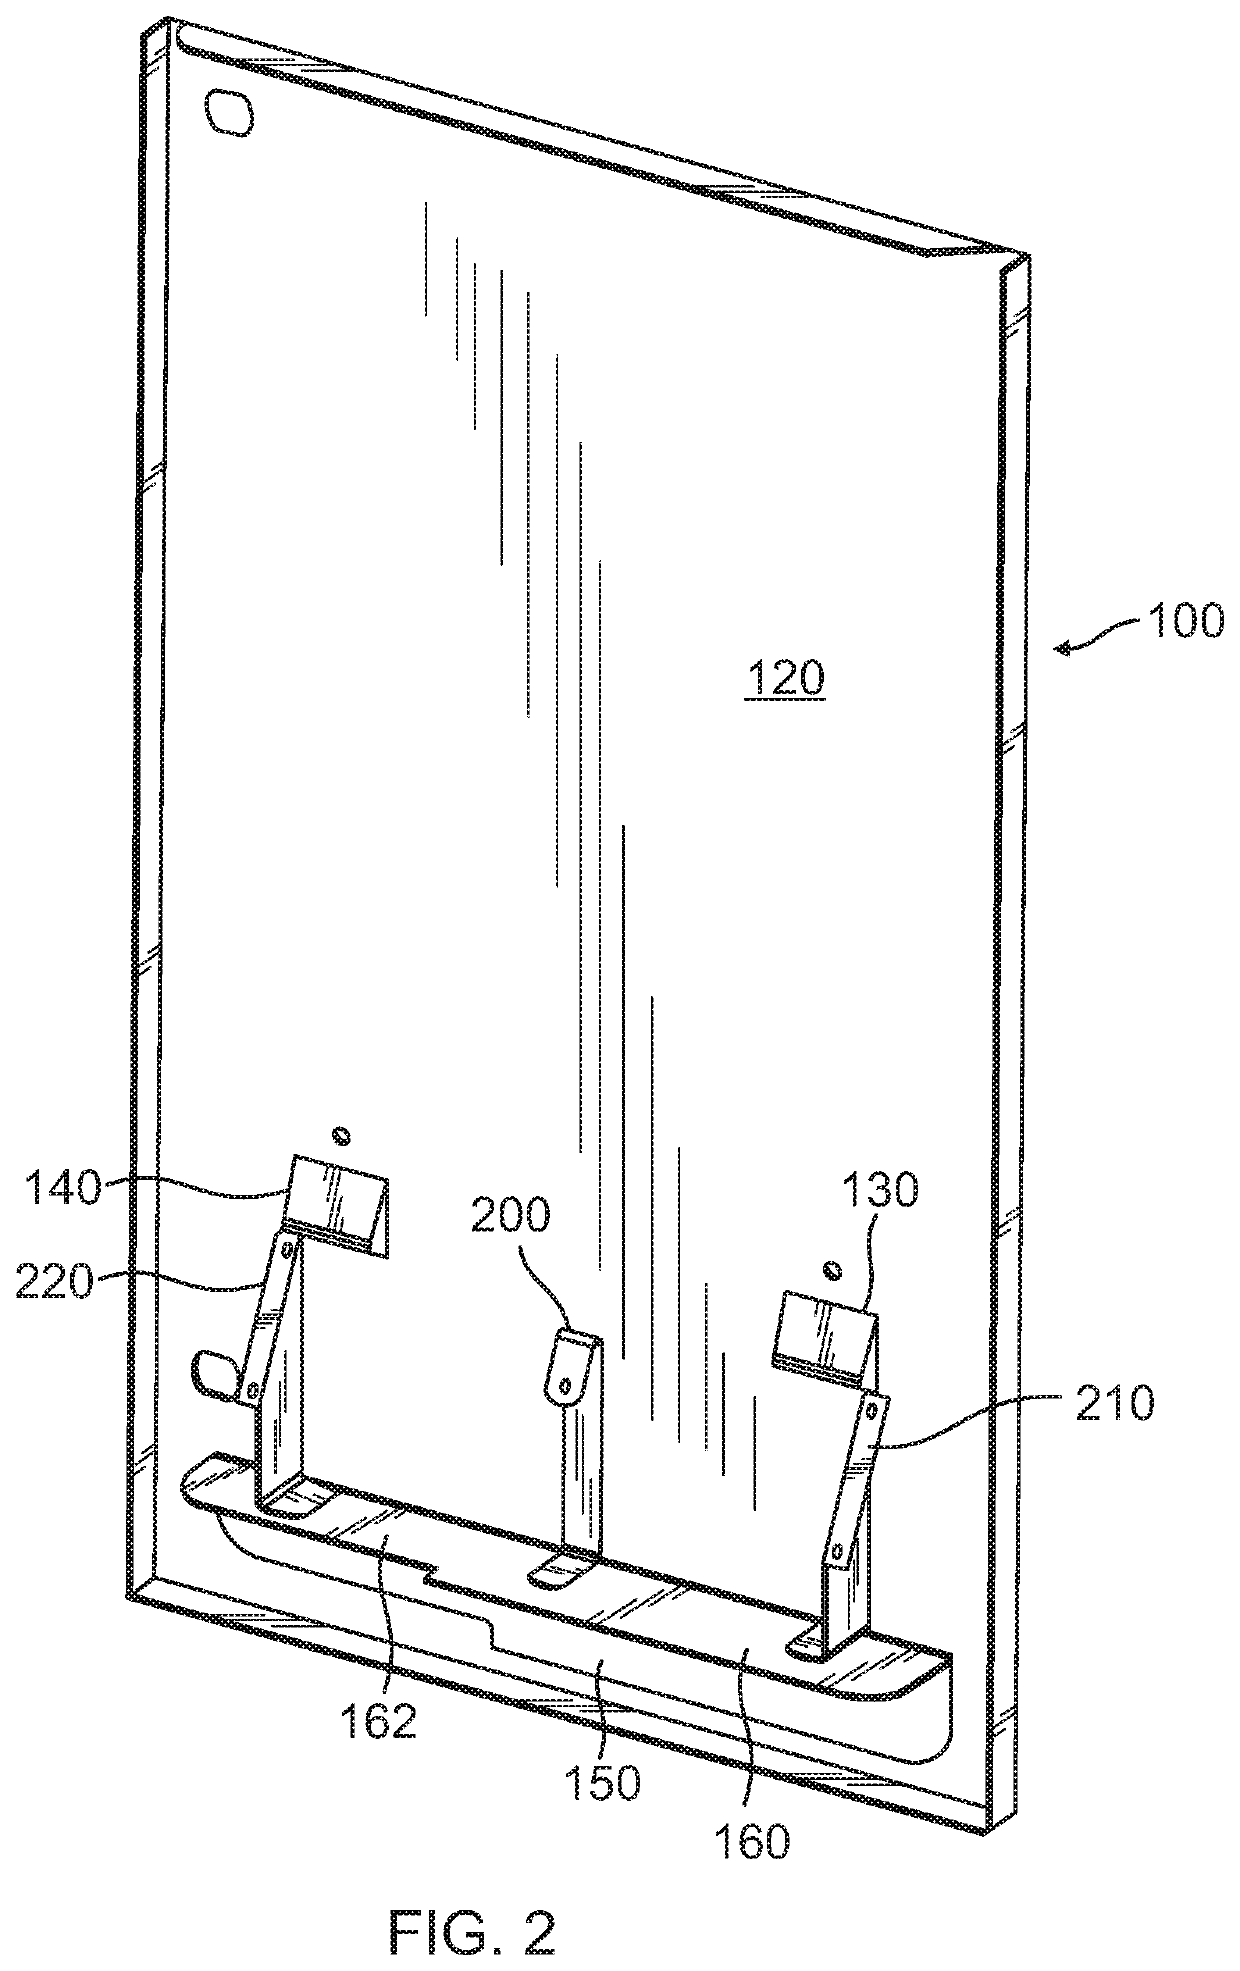 Apparatus to dispense two separate products through a coin-operated system